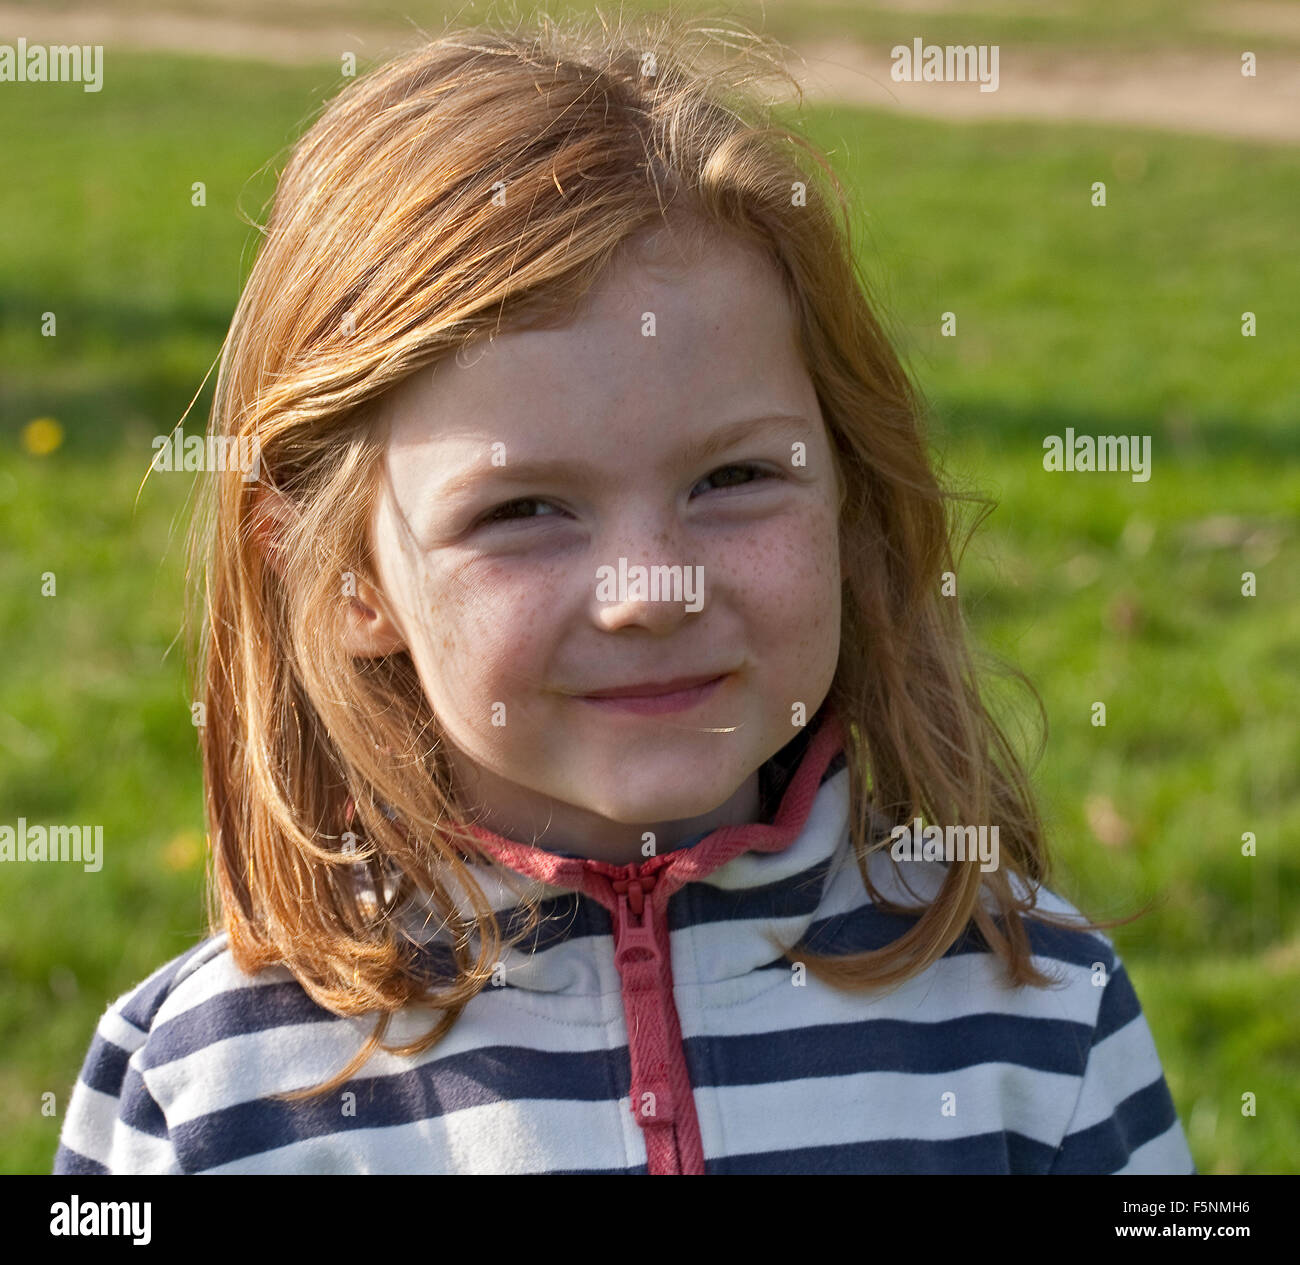 A young girl lit from the side is smiling beautifully at the camera. She has ginger hair which glows in the sunlight. Stock Photo